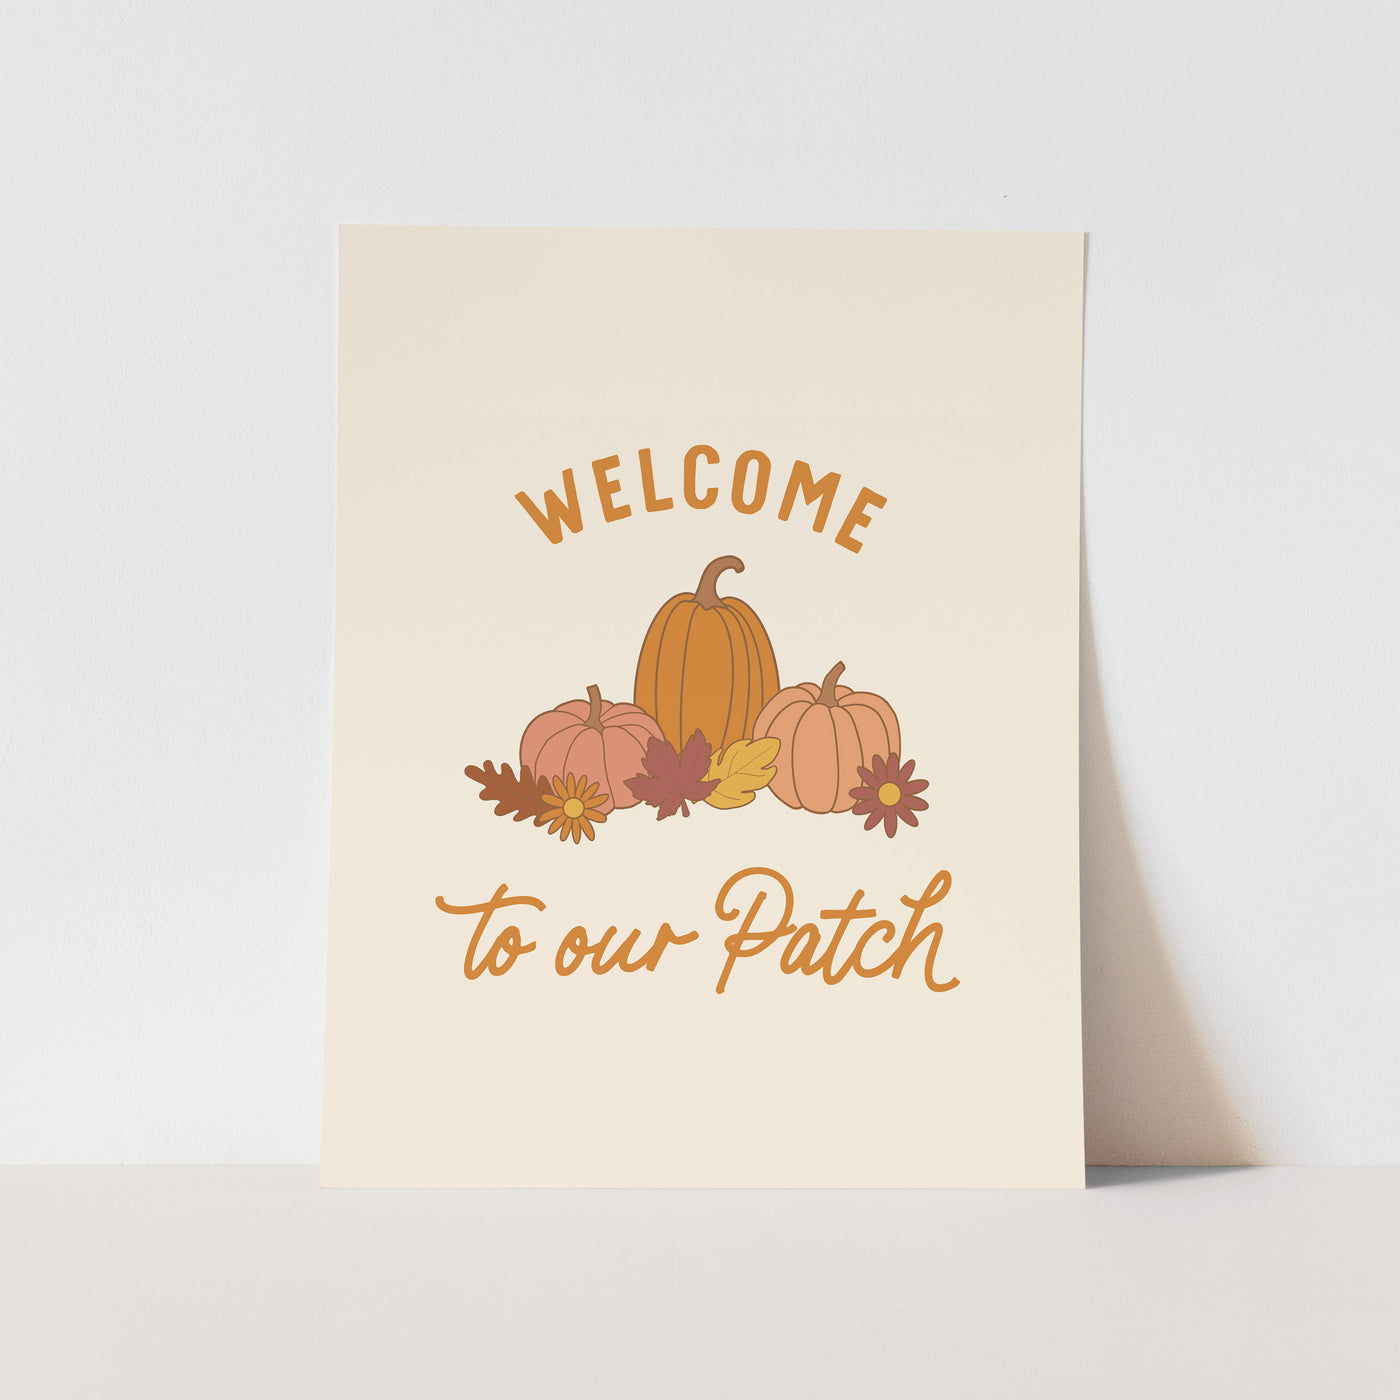 Art Print: Welcome To Our Patch